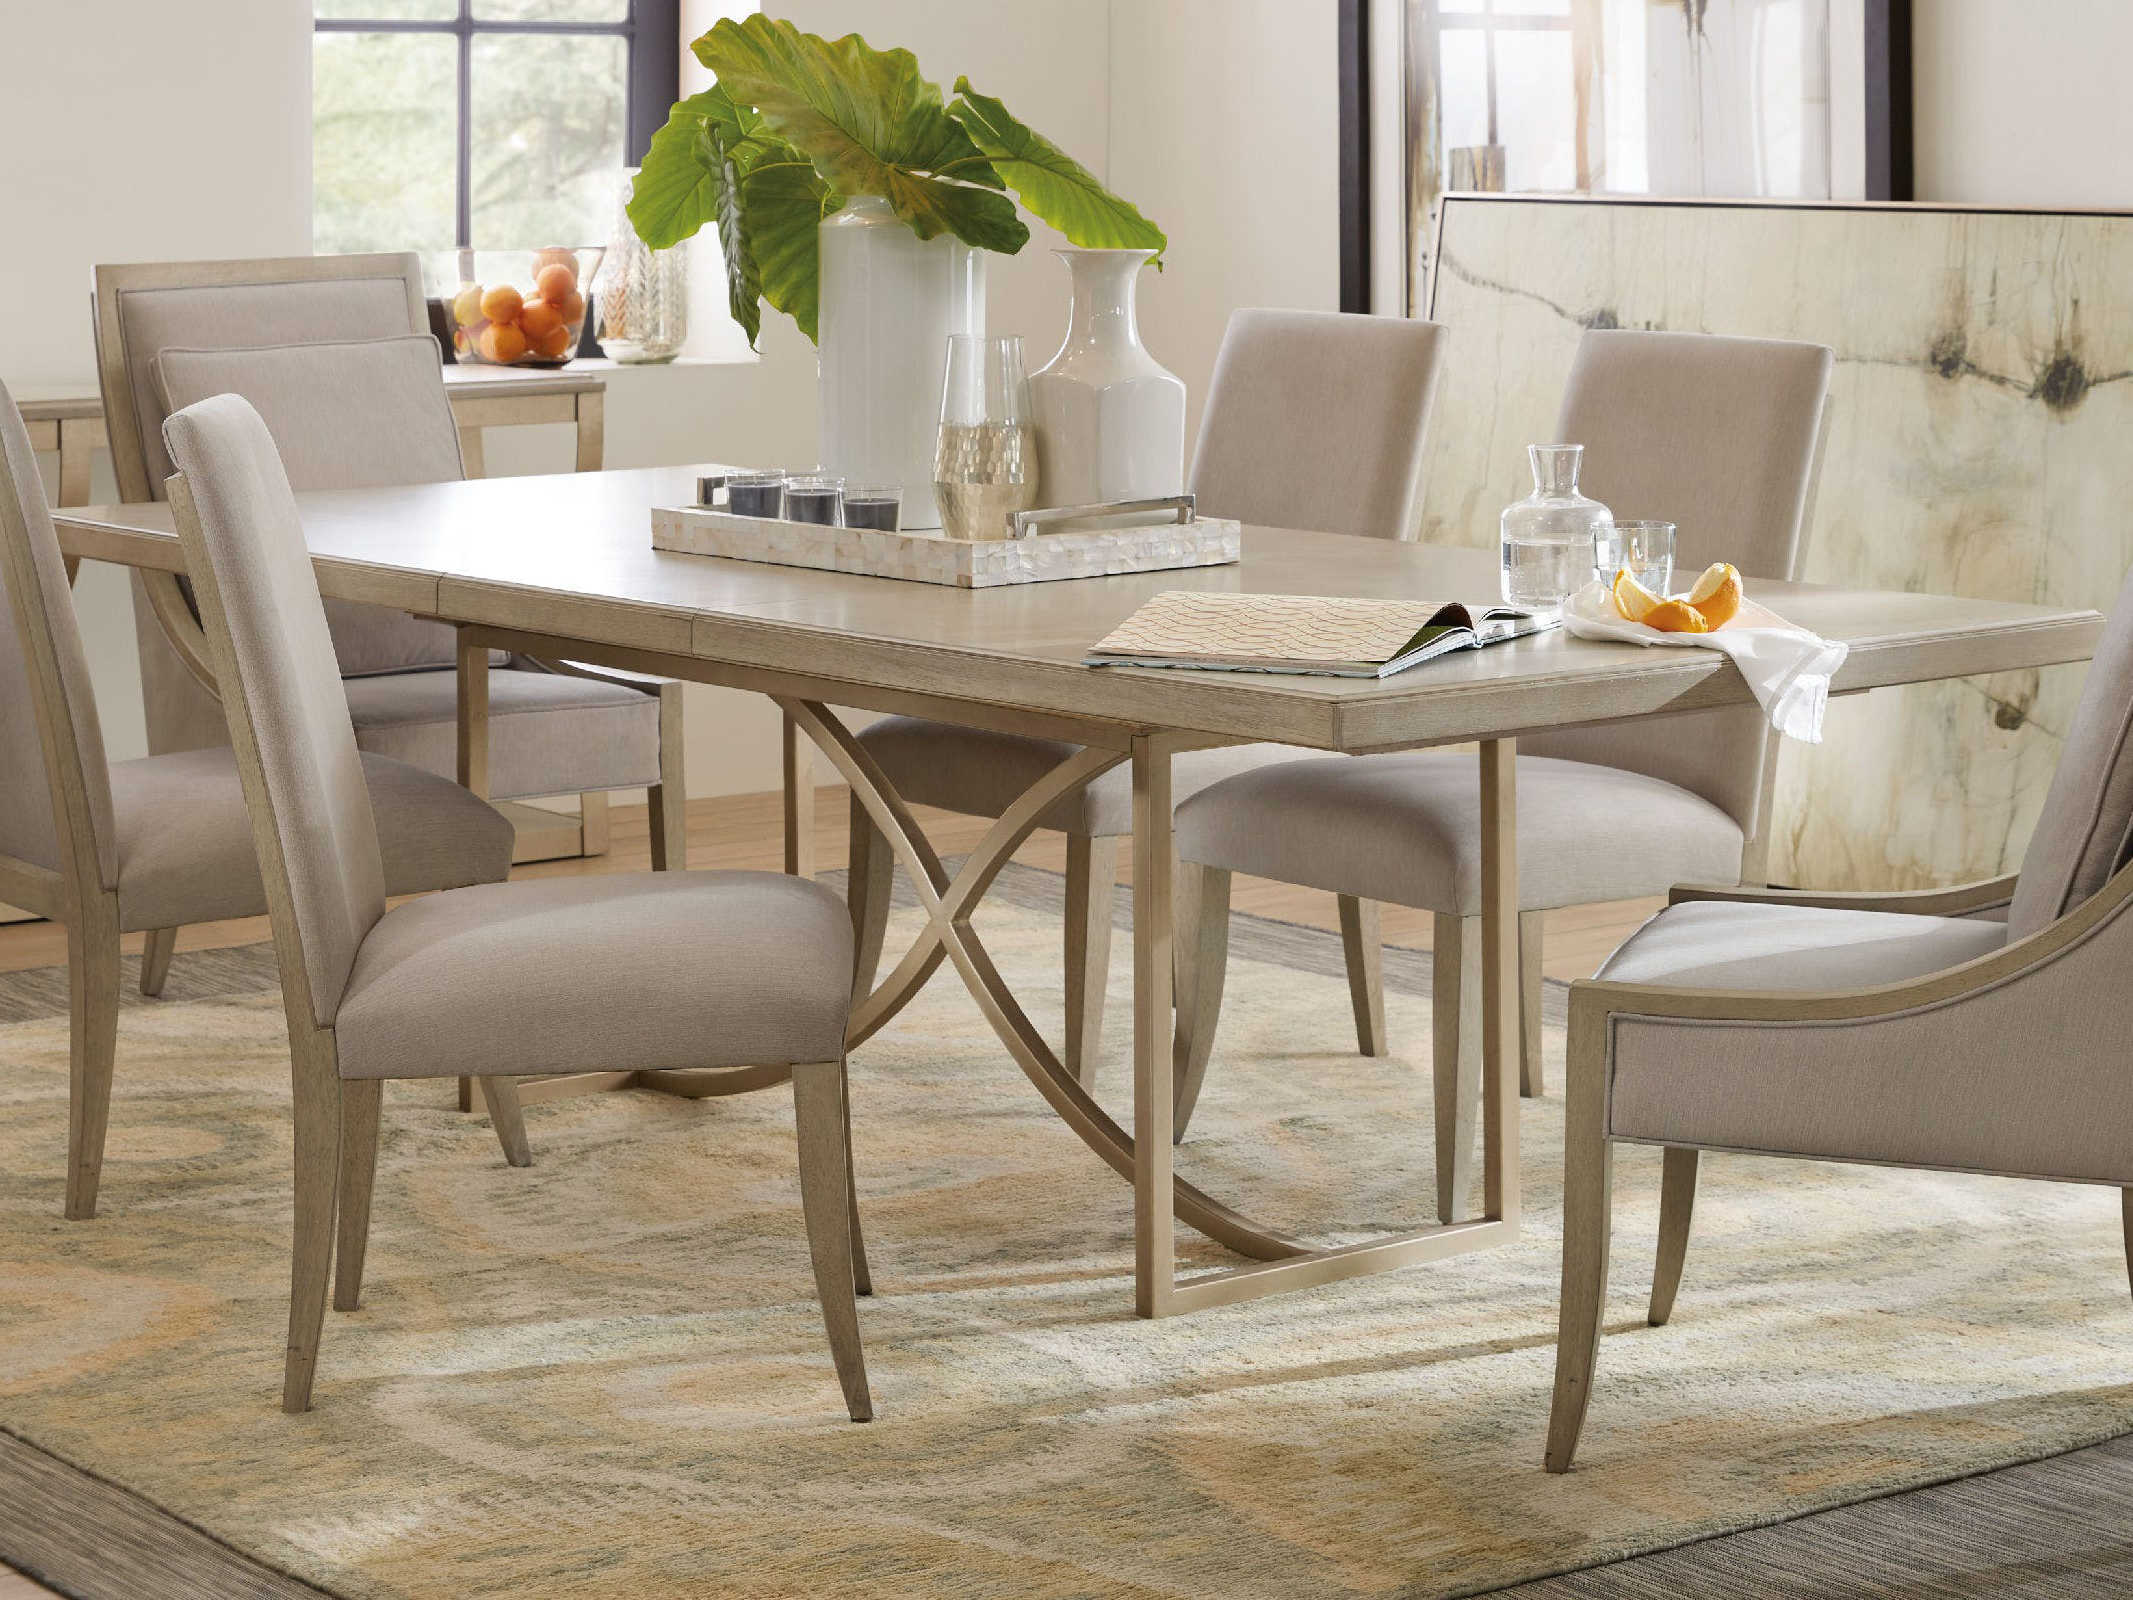 Summer Designs For Dining Room Table